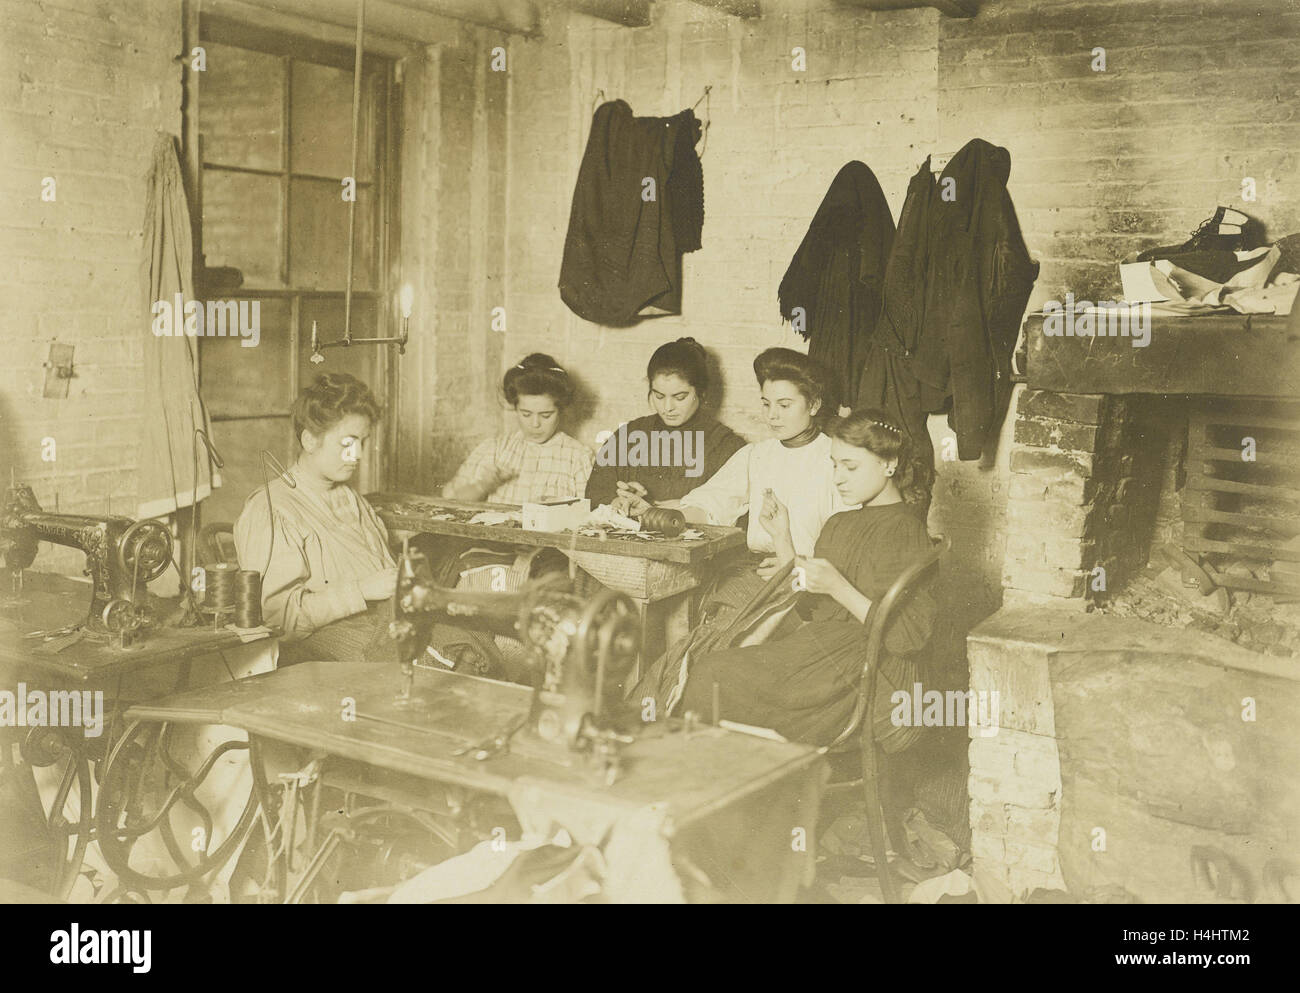 Five young seamstresses in a studio, Lewis Wickes Hine, 1906 Stock Photo